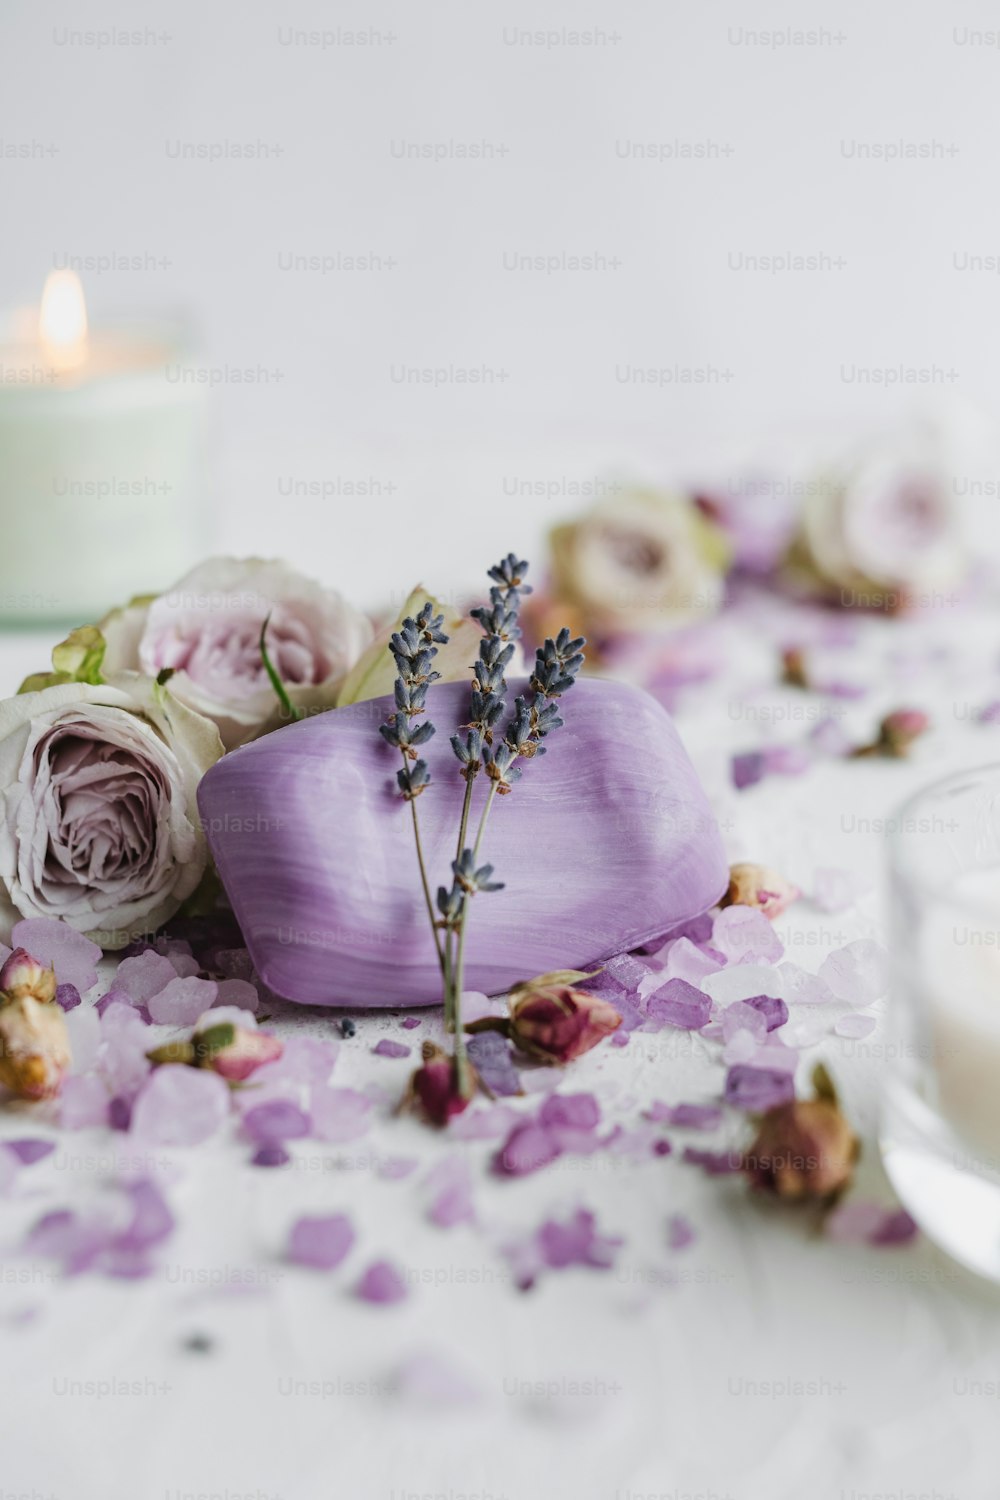 a candle and some flowers on a table